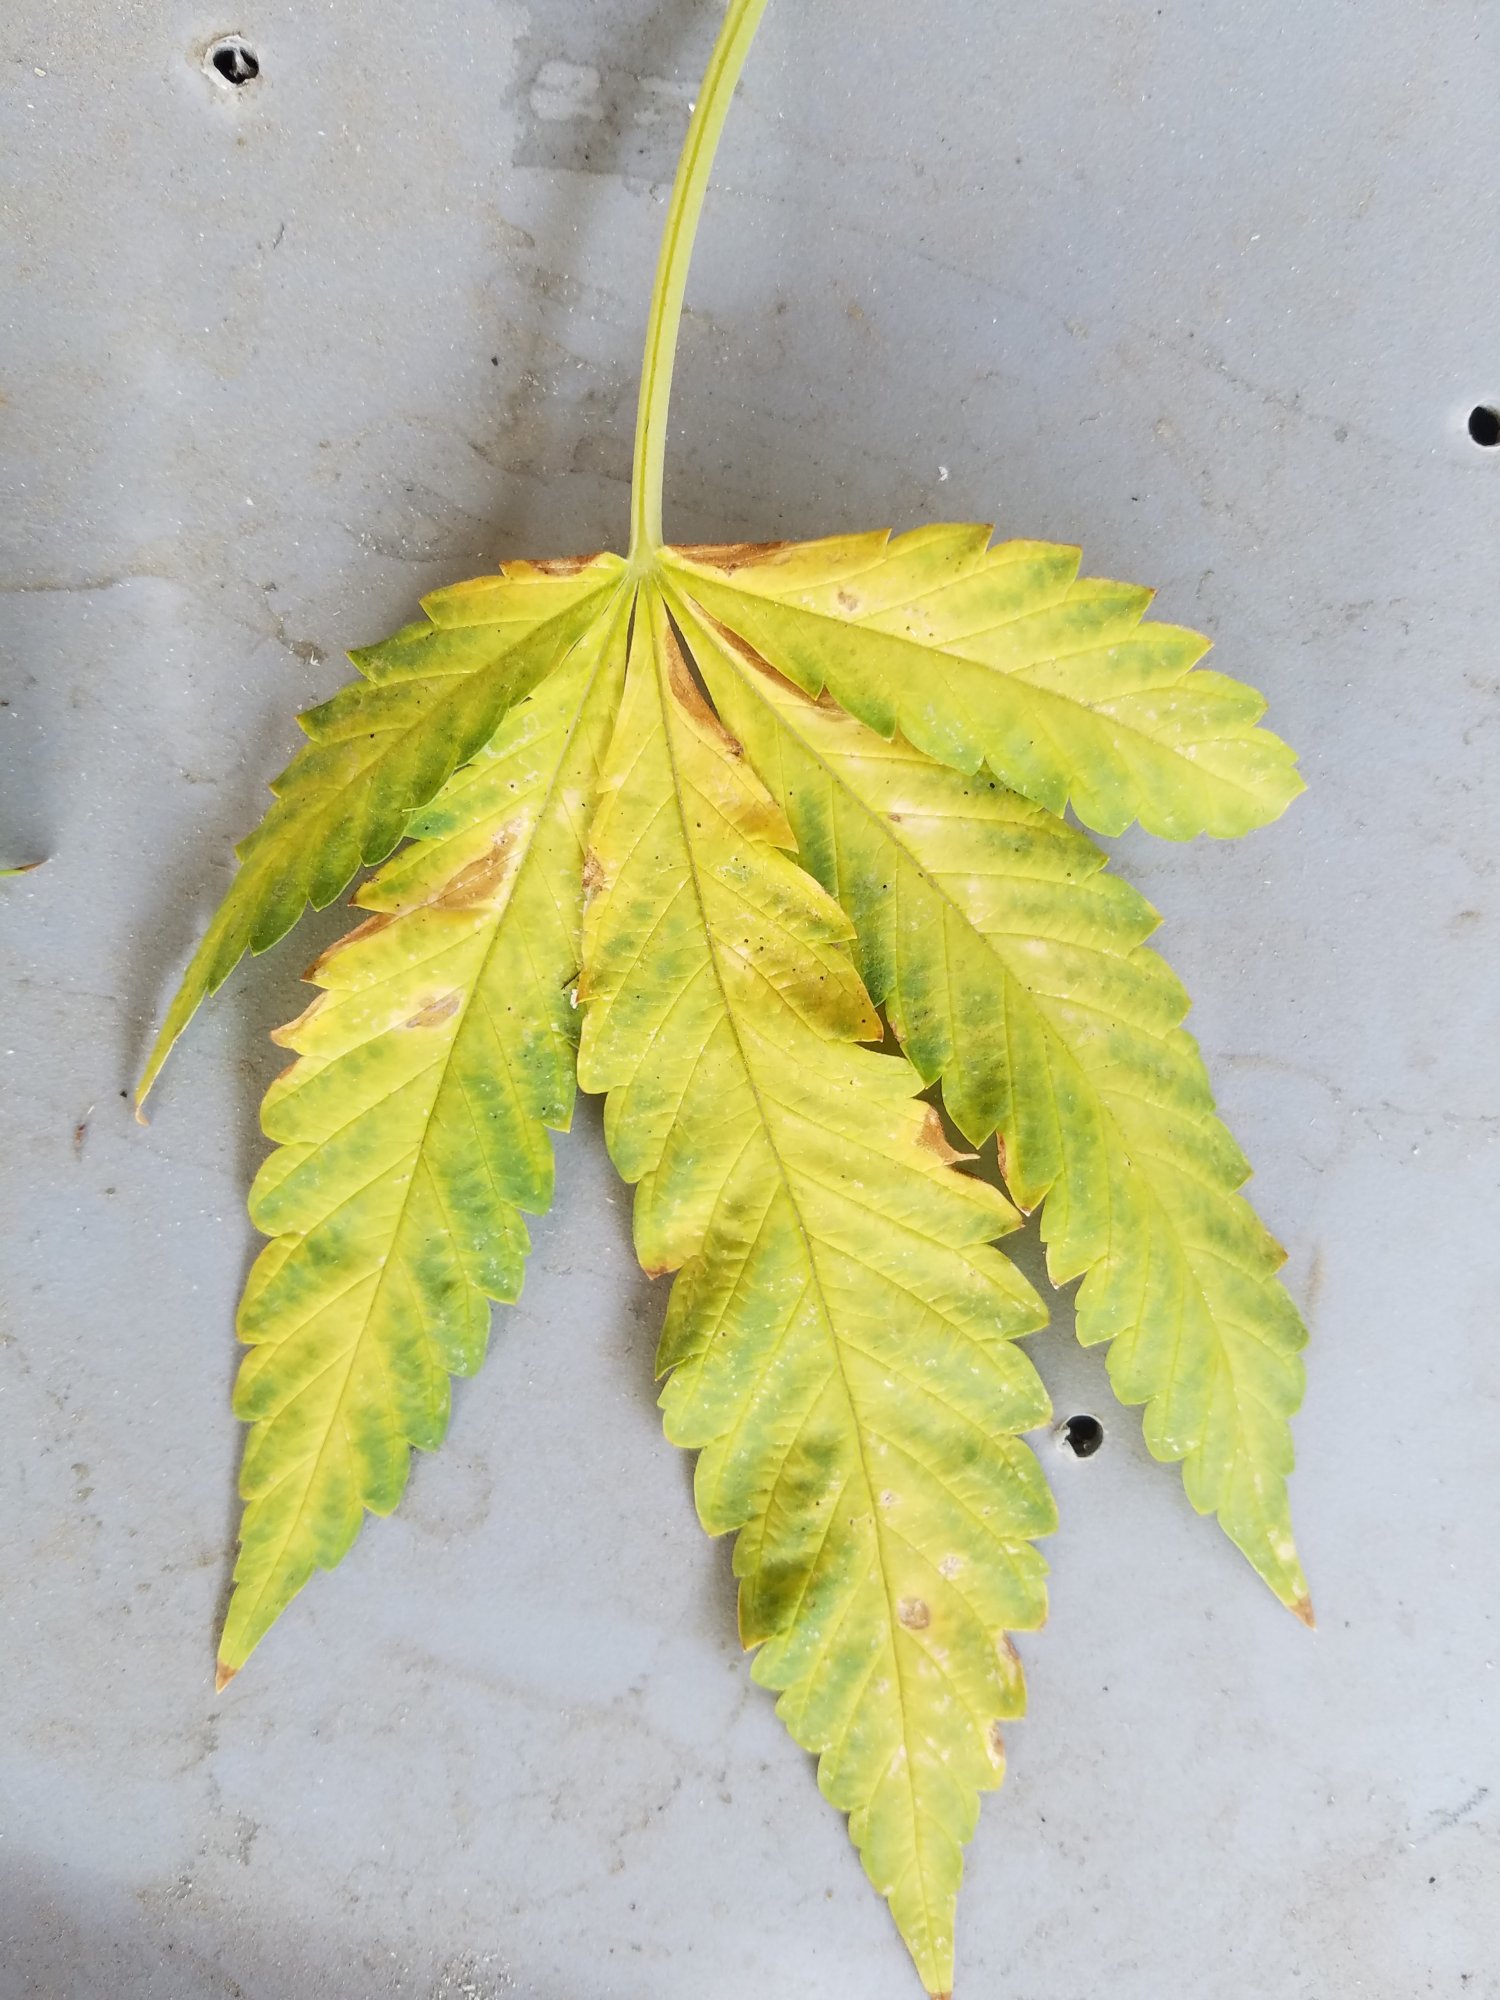 help-me-diagnose-my-leaves-with-pics.jpg